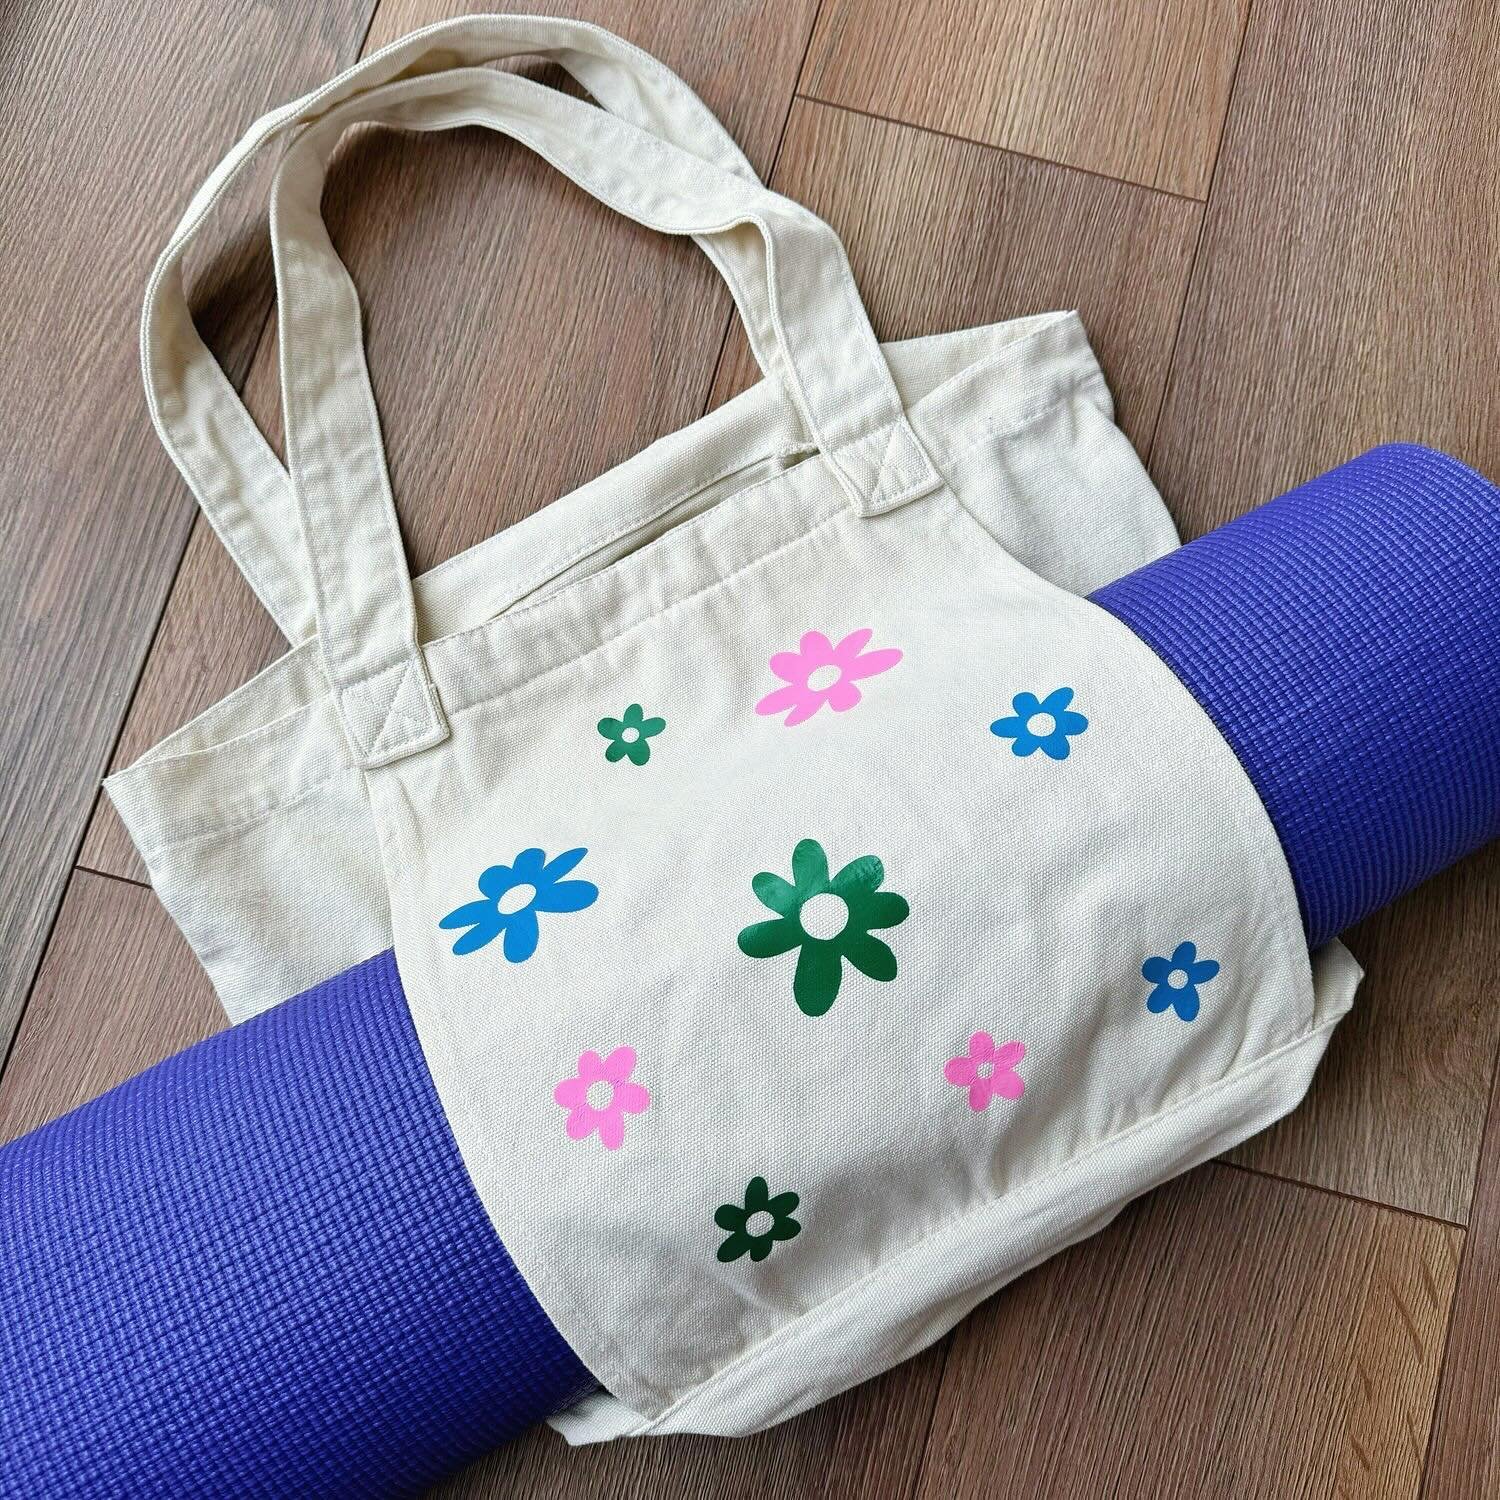 There&rsquo;s only one exercise mat tote bag left in stock and they won&rsquo;t be restocked! Will you be the lucky person to grab the last one? 🌸